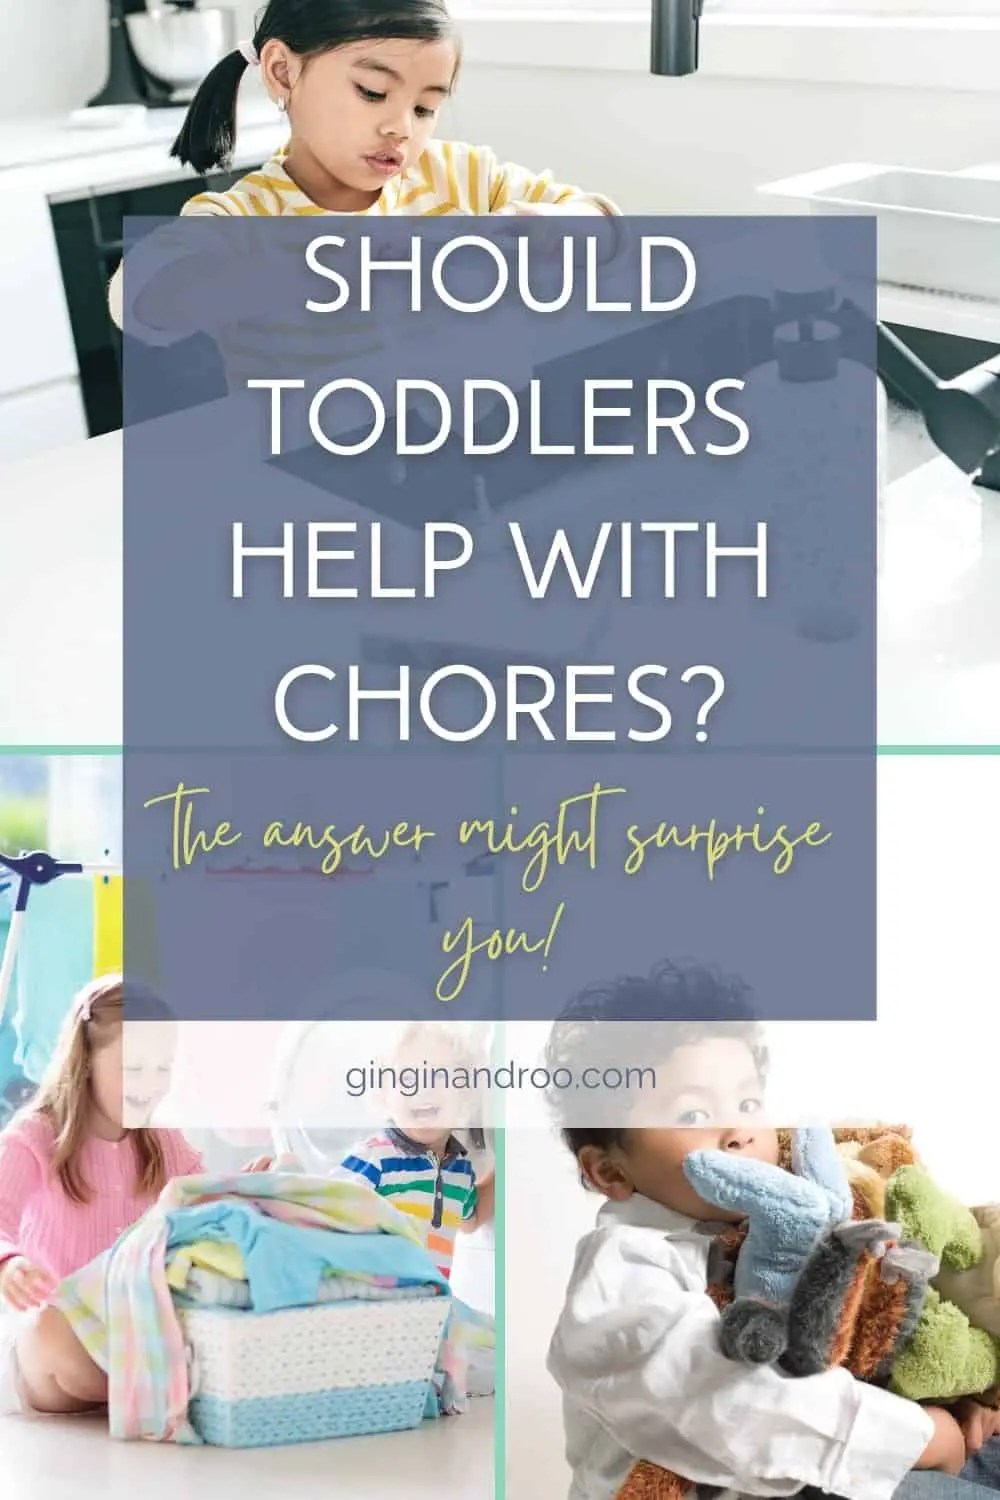 Teaching 2 and 3 Year Olds - Activities for Toddlers and Preschoolers -  Need some suggestions for chores?